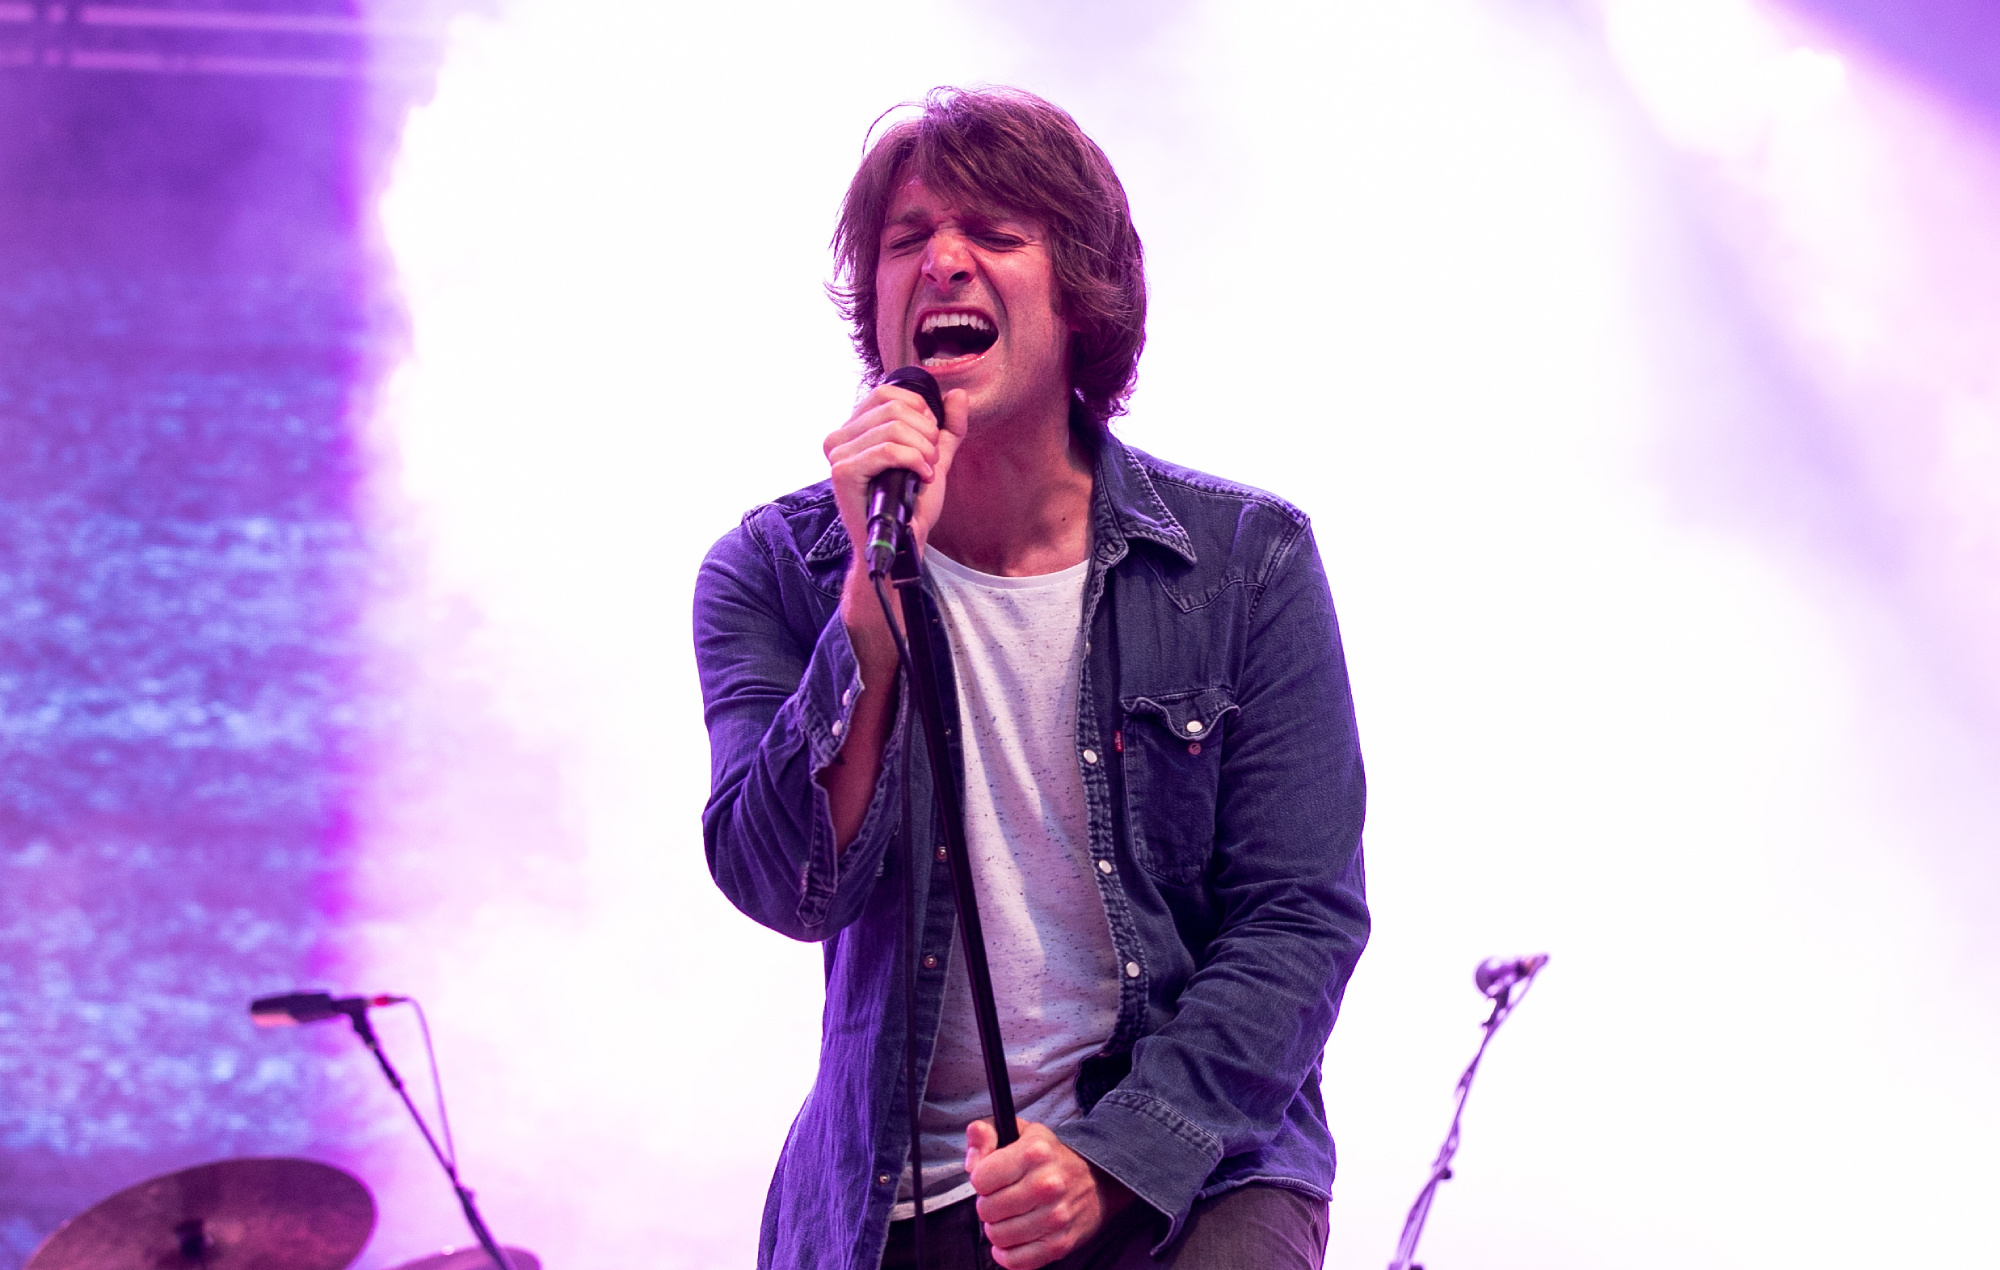 Paolo Nutini, Glasgow headline shows, Highly anticipated concerts, 2000x1270 HD Desktop